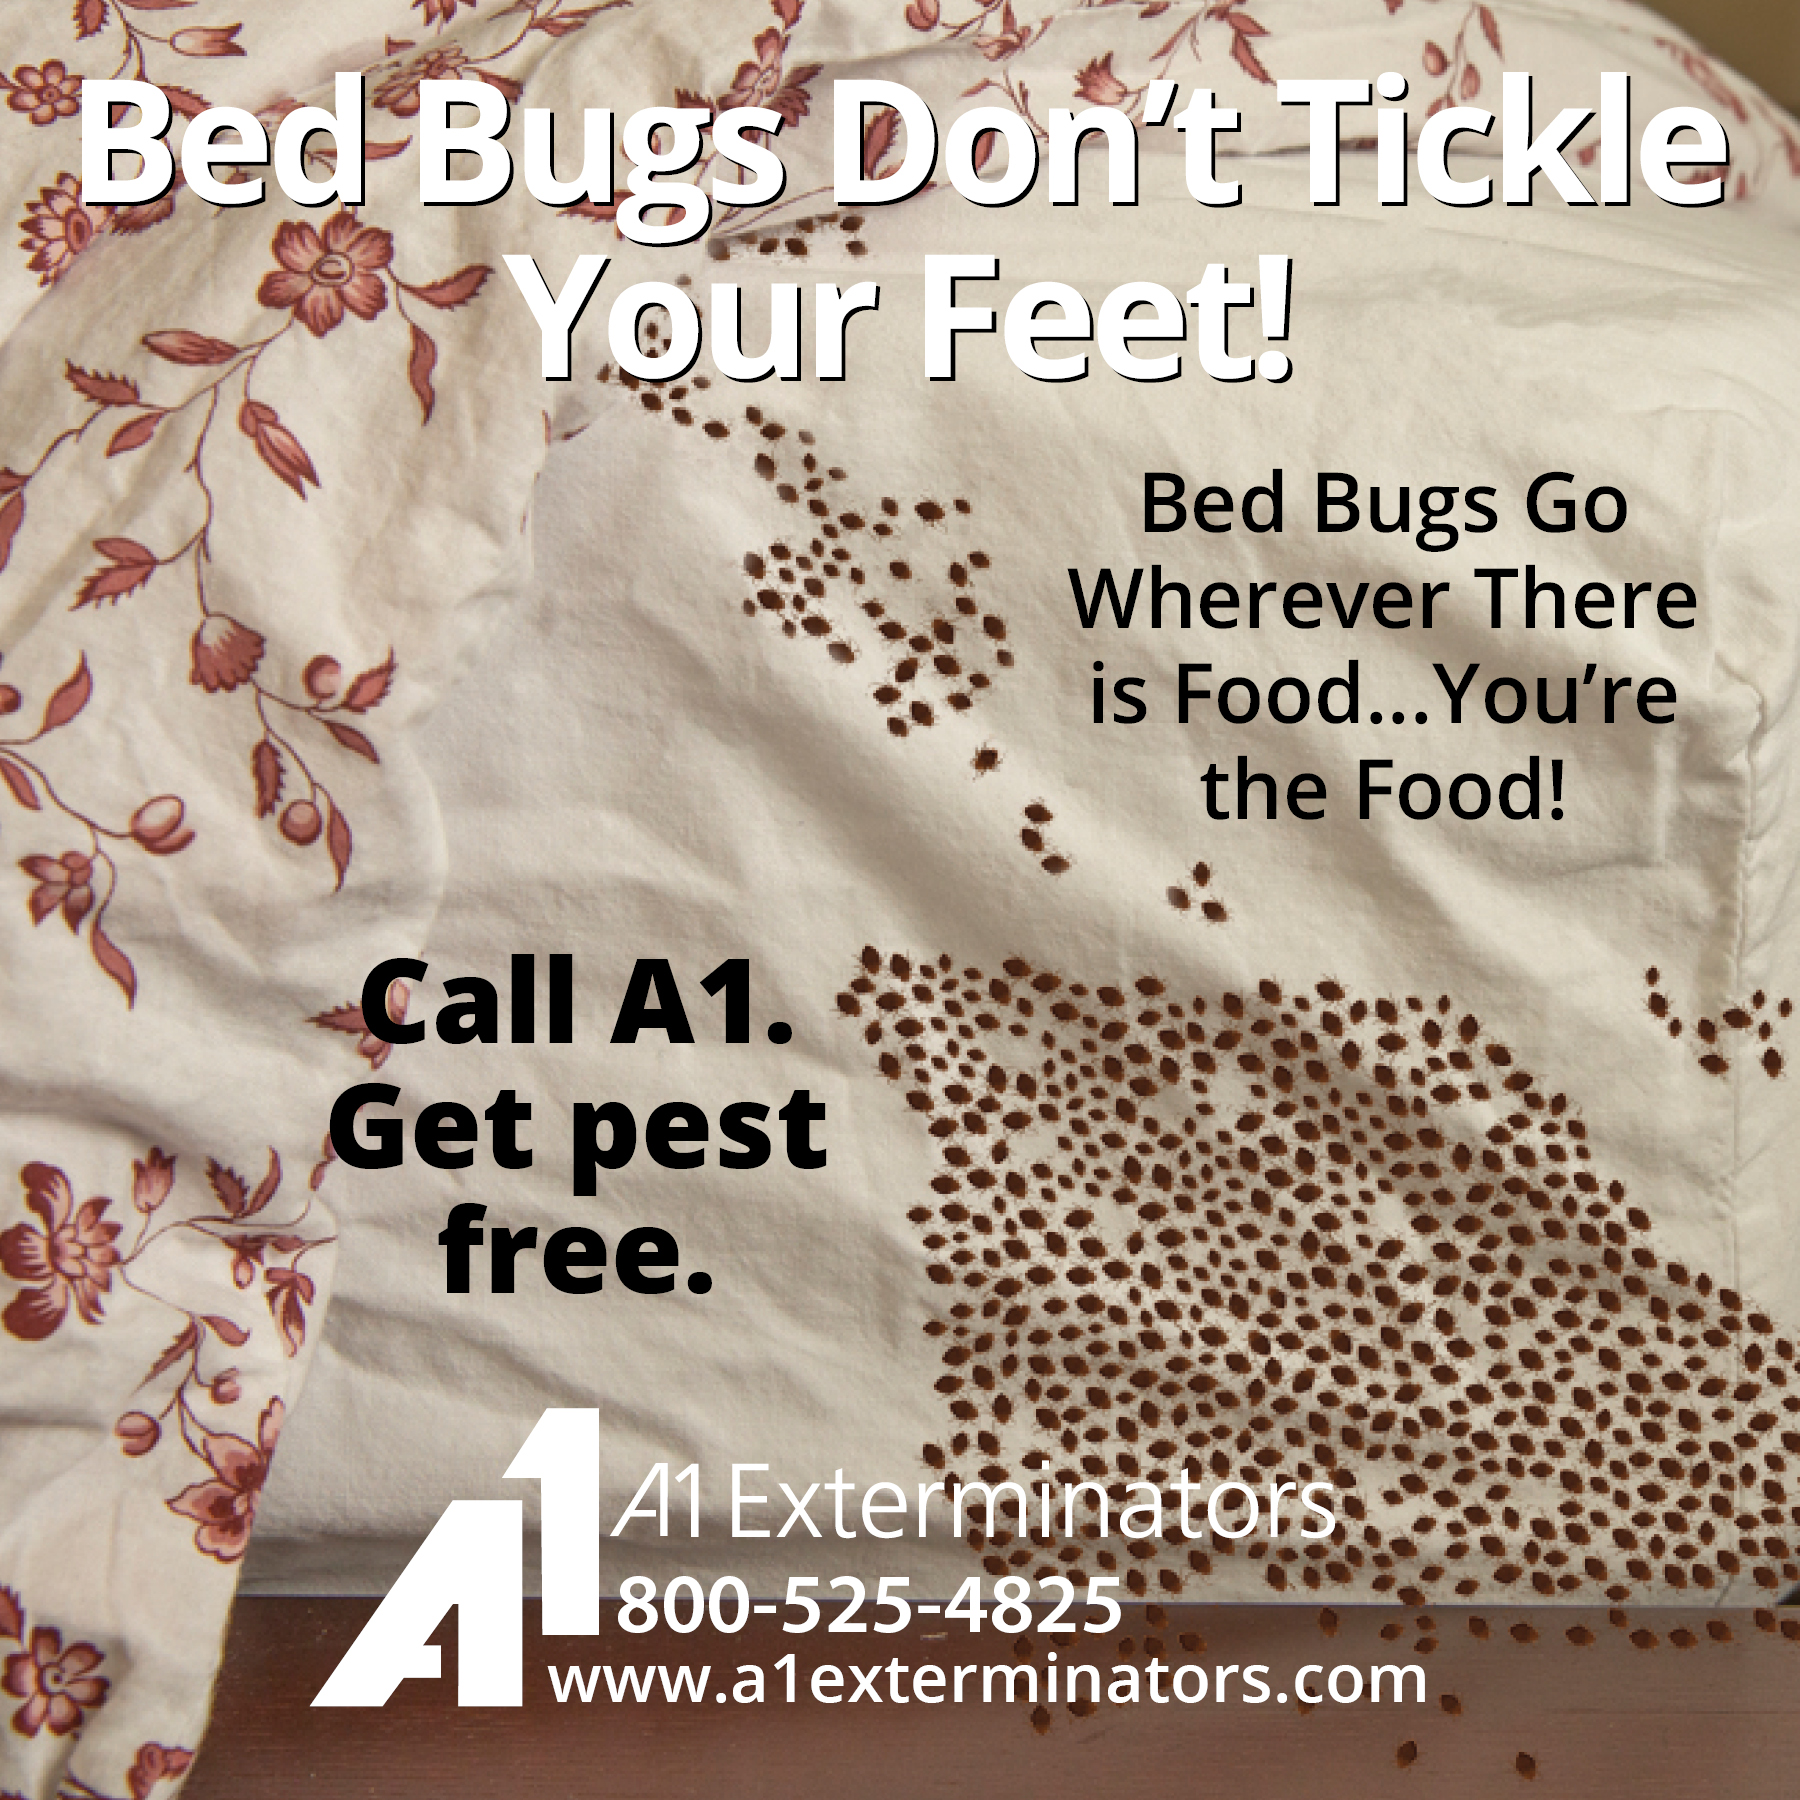 Bed bugs crawling all over bedding. "Bed bugs don't tickle your feet! Bed bugs go wherever there is food... You're the food! Call A1. Get pest free." [A1 Logo]